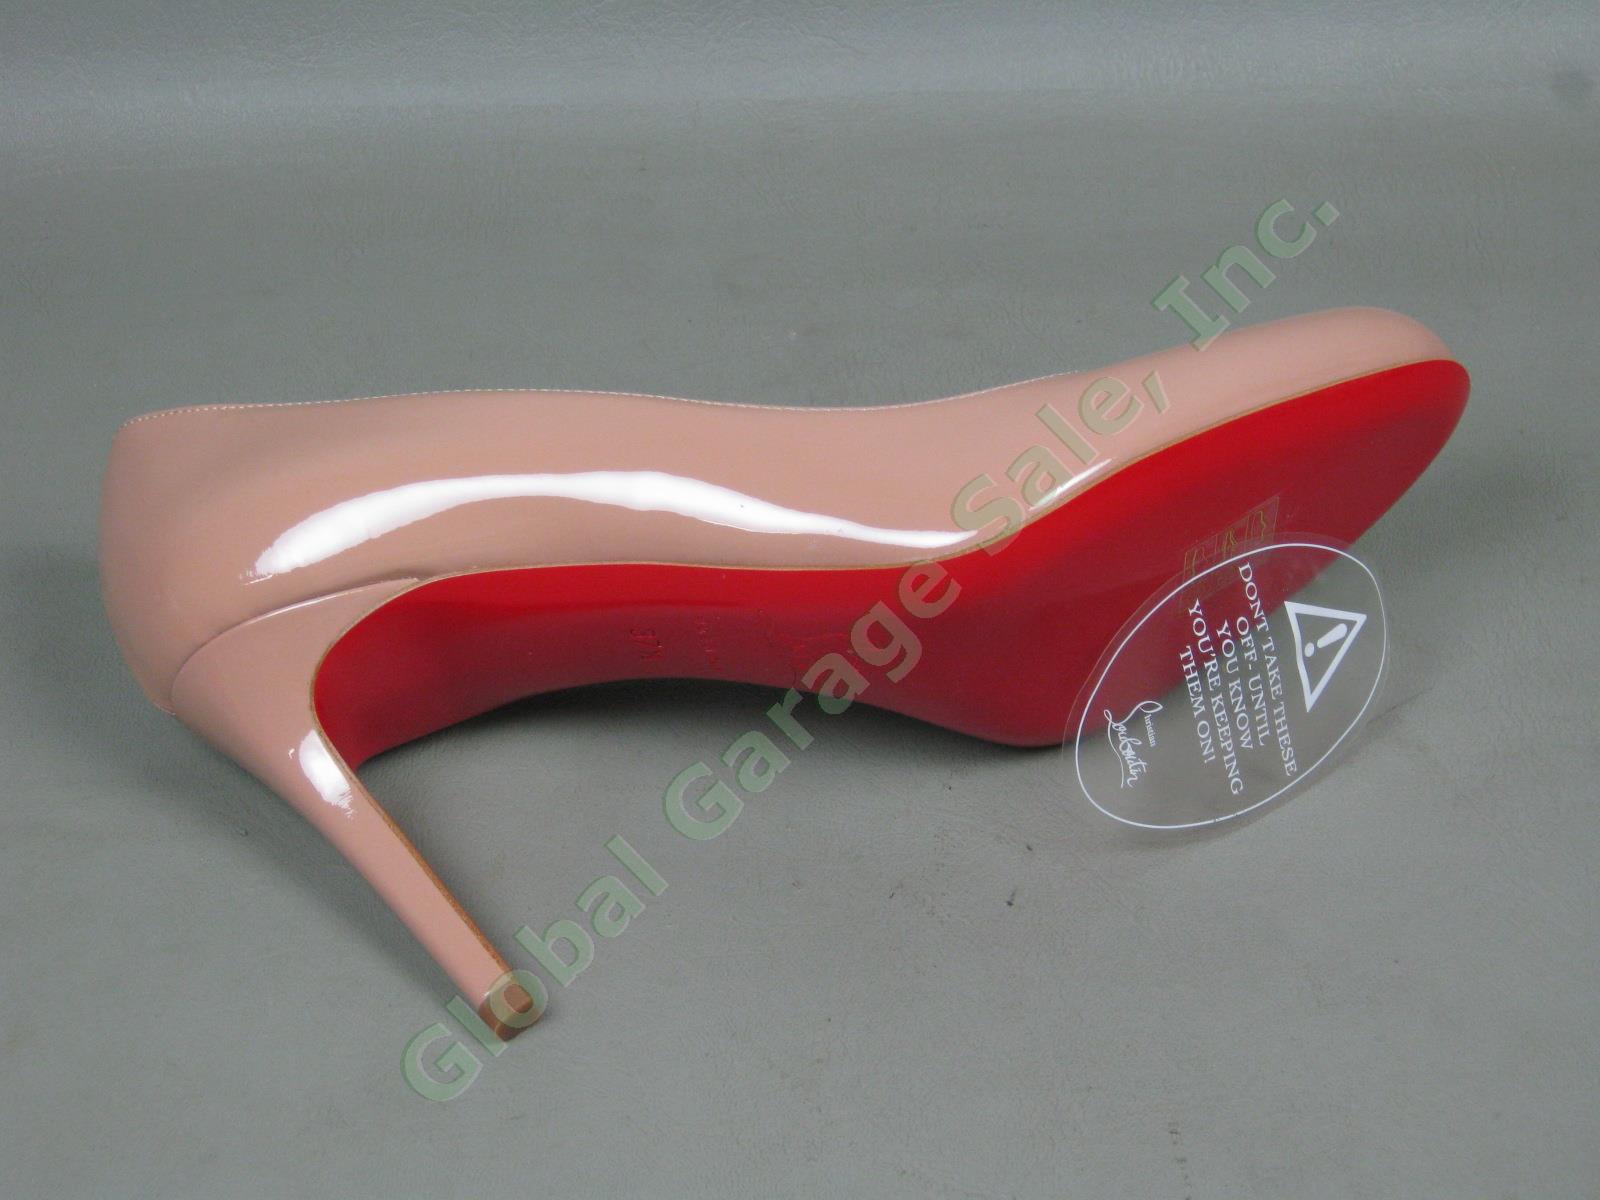 NEW Christian Louboutin Nude Simple Patent Calf Leather Pump 90mm Heel 37.5/7.5 6